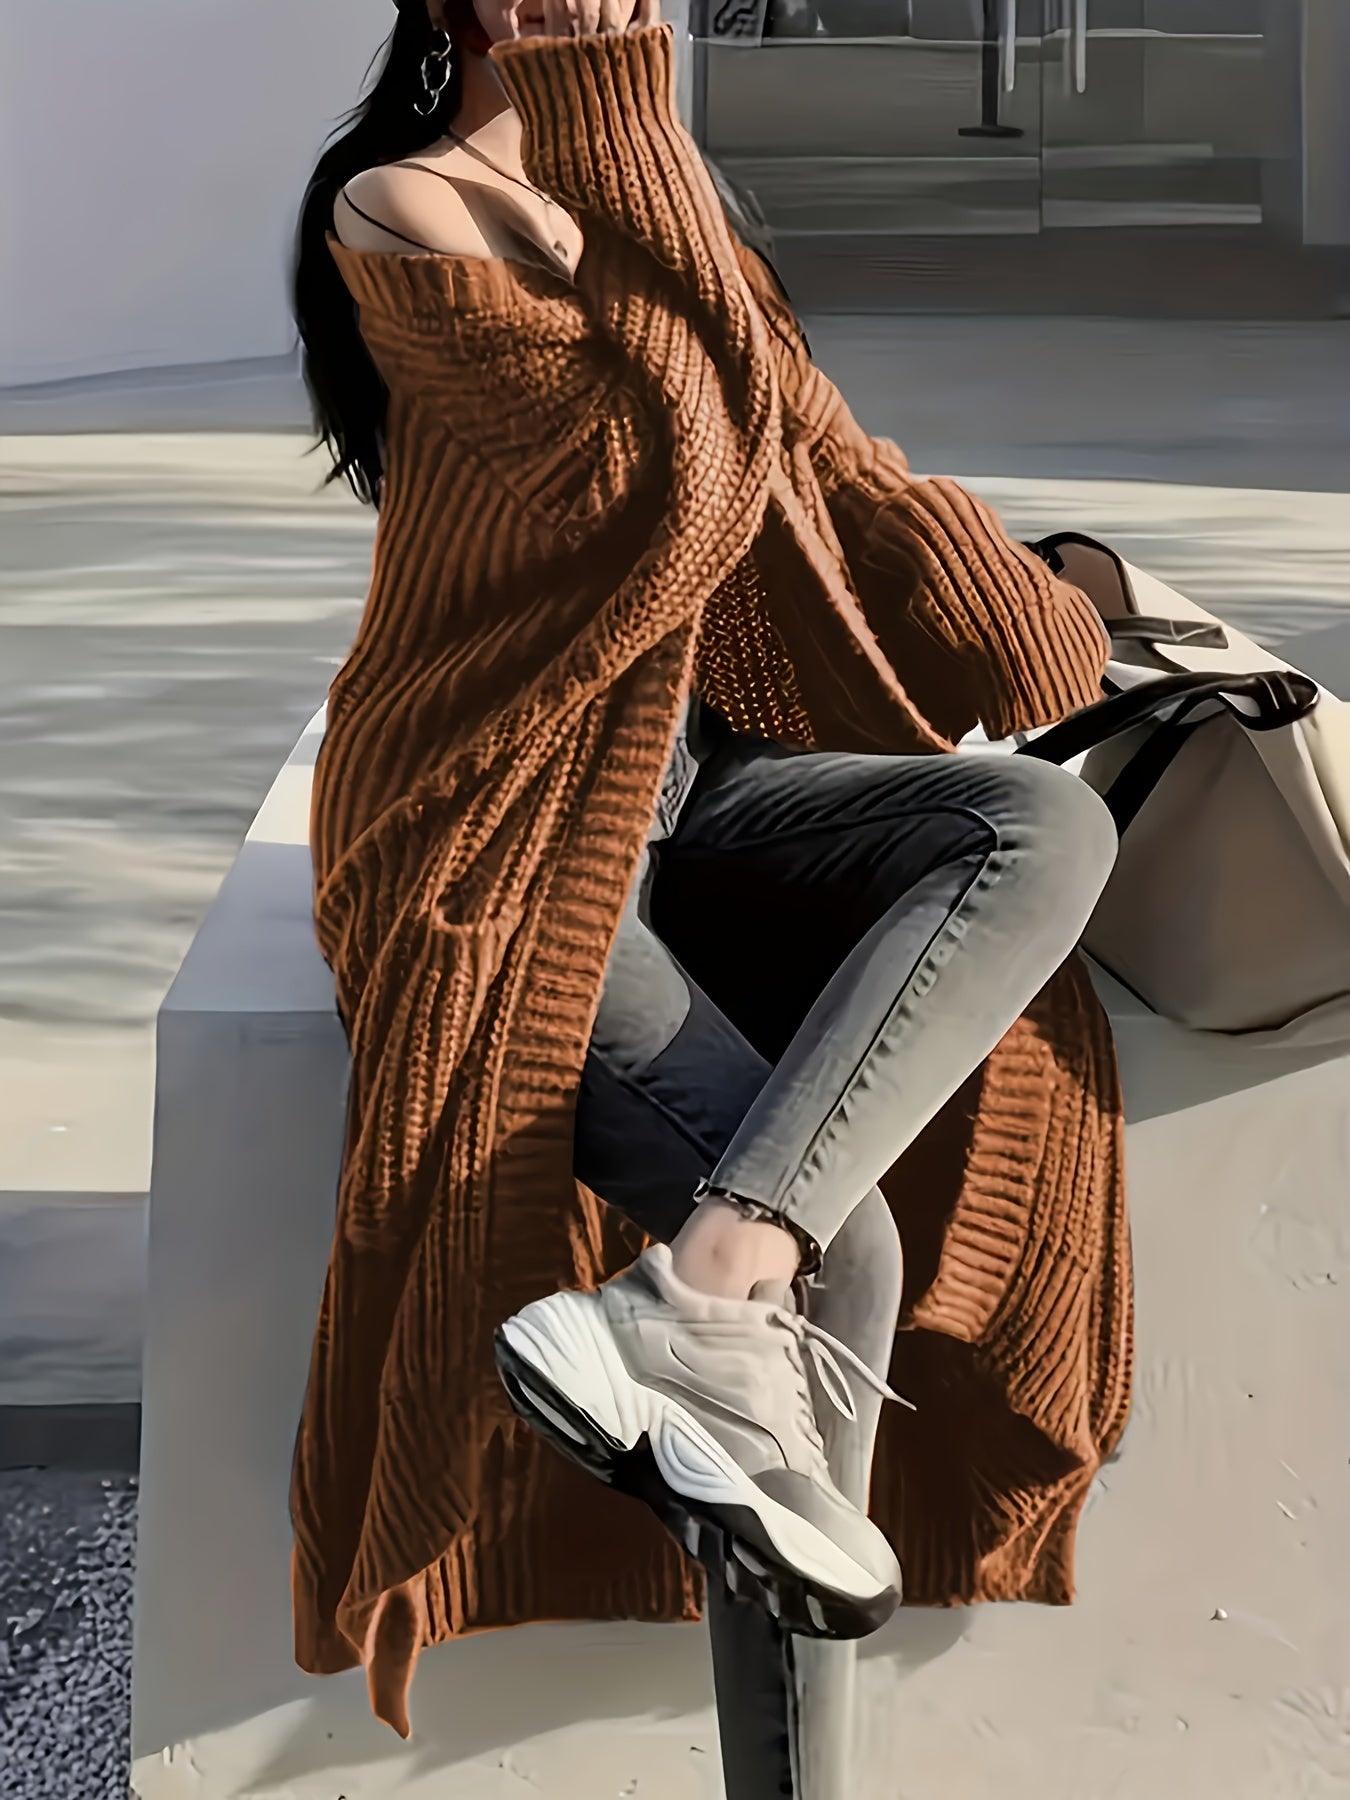 A person wearing a Maramalive™ Plus Size Open Front Loose Knit Cardigan, Casual Long Sleeve Long Length Cardigan With Pocket, Women's Plus Size Clothing, gray jeans, and white sneakers is sitting on a low wall outdoors, with a large beige bag beside them. Their face is partially covered by the cardigan.